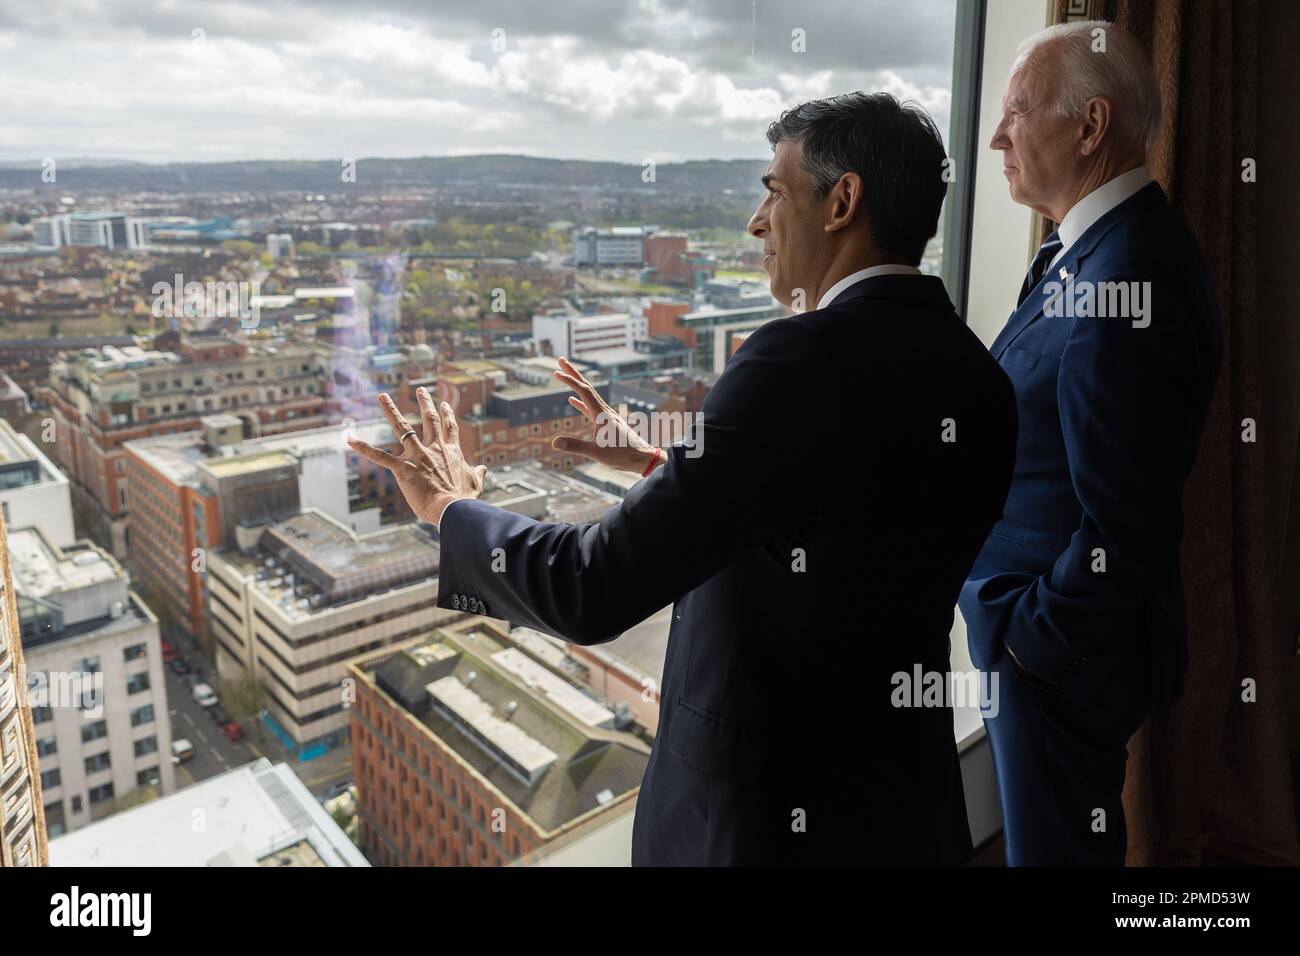 (230412) -- BELFAST, April 12, 2023 (Xinhua) -- British Prime Minister Rishi Sunak (L) meets with U.S. President Joe Biden in Belfast, Northern Ireland, the United Kingdom, on April 12, 2023. During his visit to Belfast on Wednesday, U.S. President Joe Biden called for the restoration of the power-sharing government in Northern Ireland. However, analysts do not expect his plea to lead to significant change. (Simon Walker/No 10 Downing Street/Handout via Xinhua) Stock Photo